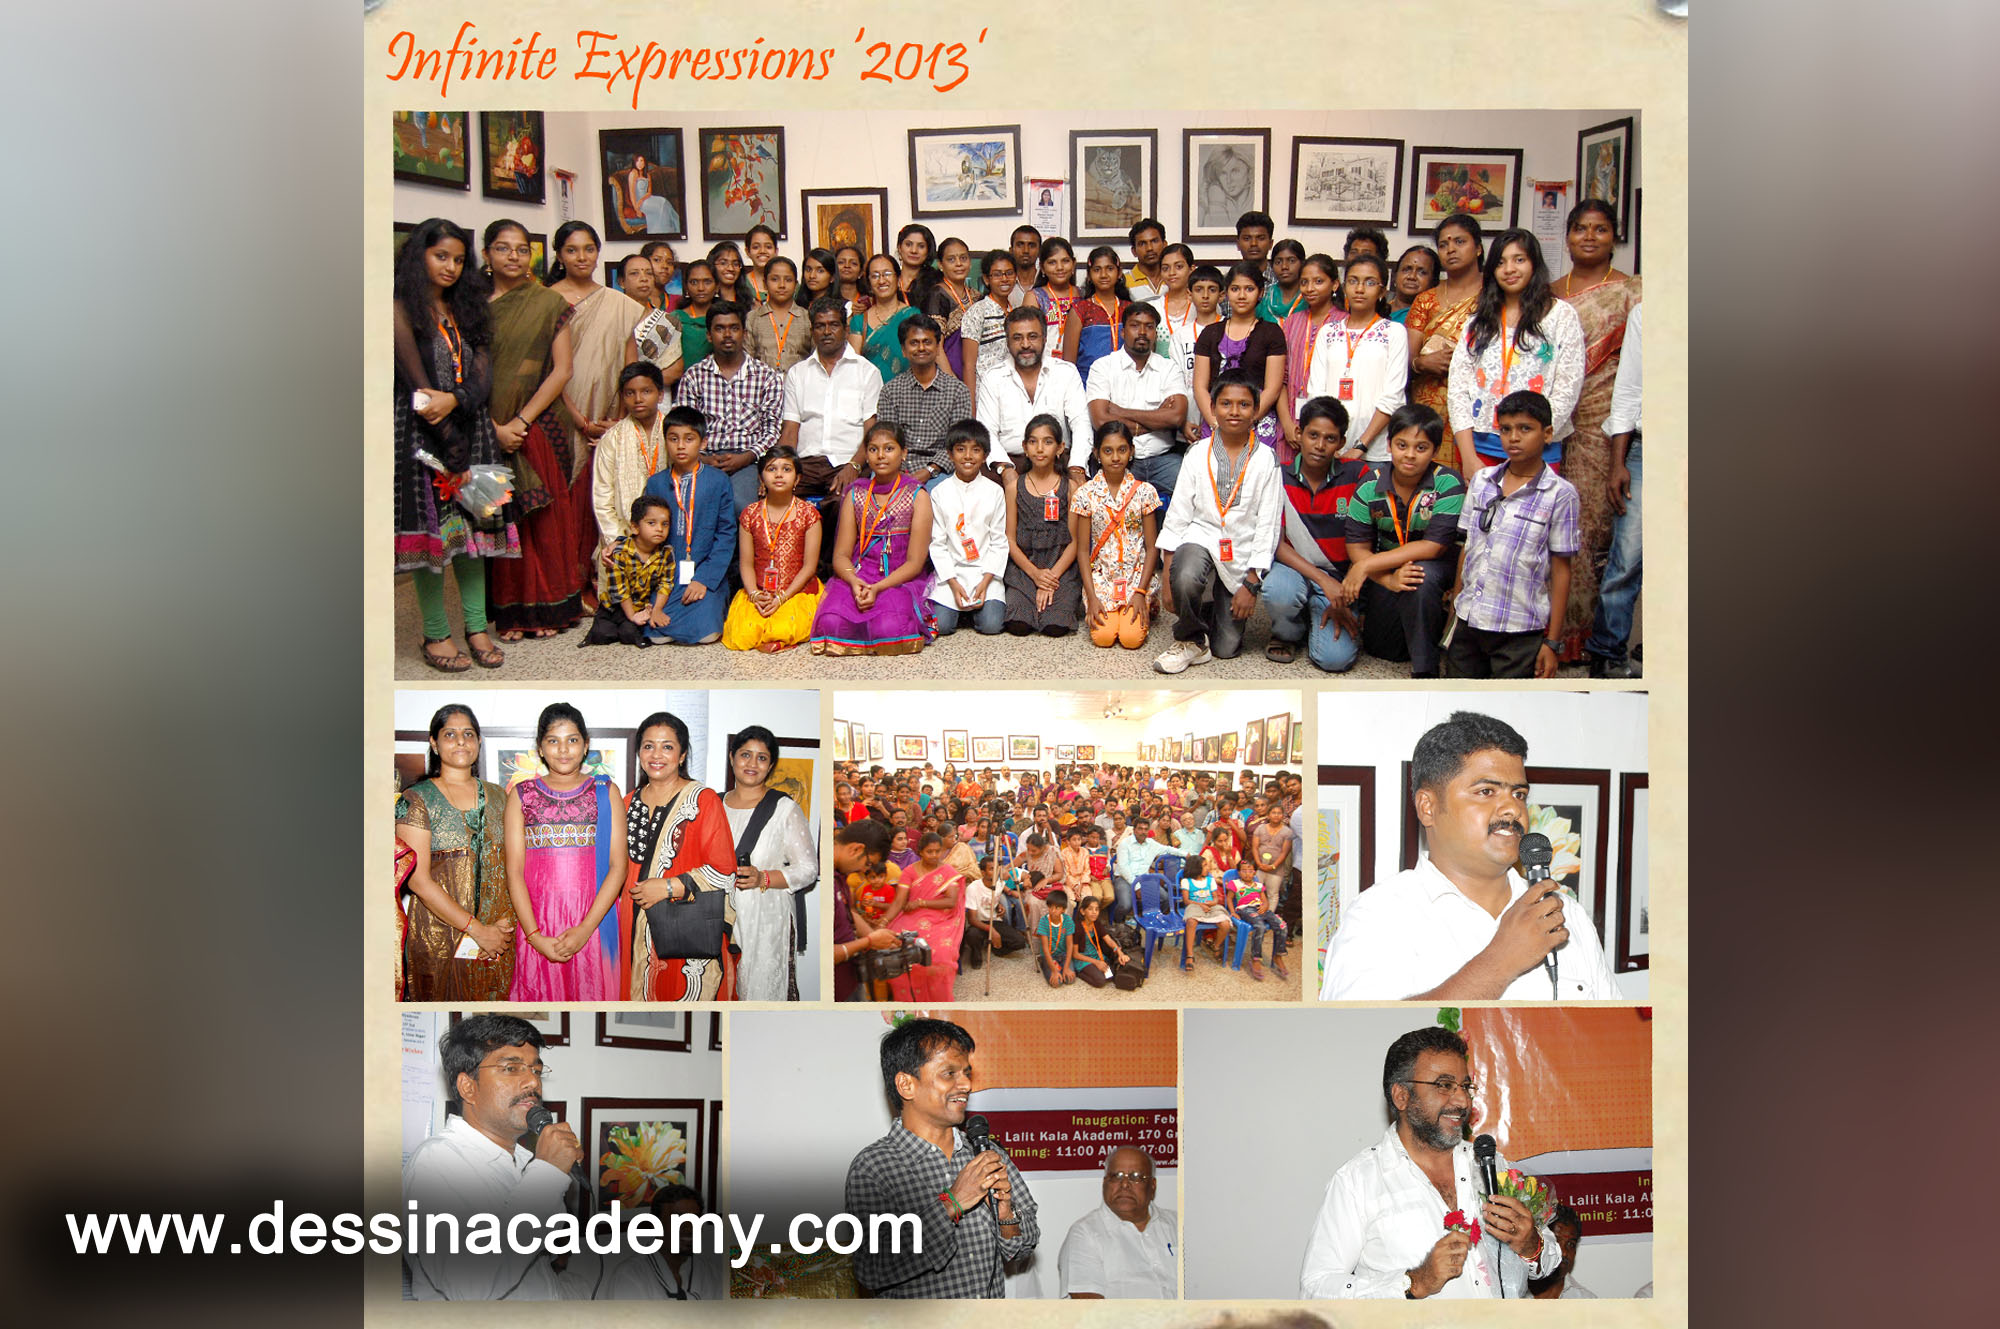 Dessin School of Arts Event Gallery 3, Drawing Coaching in ChandapuraDessin School of Arts